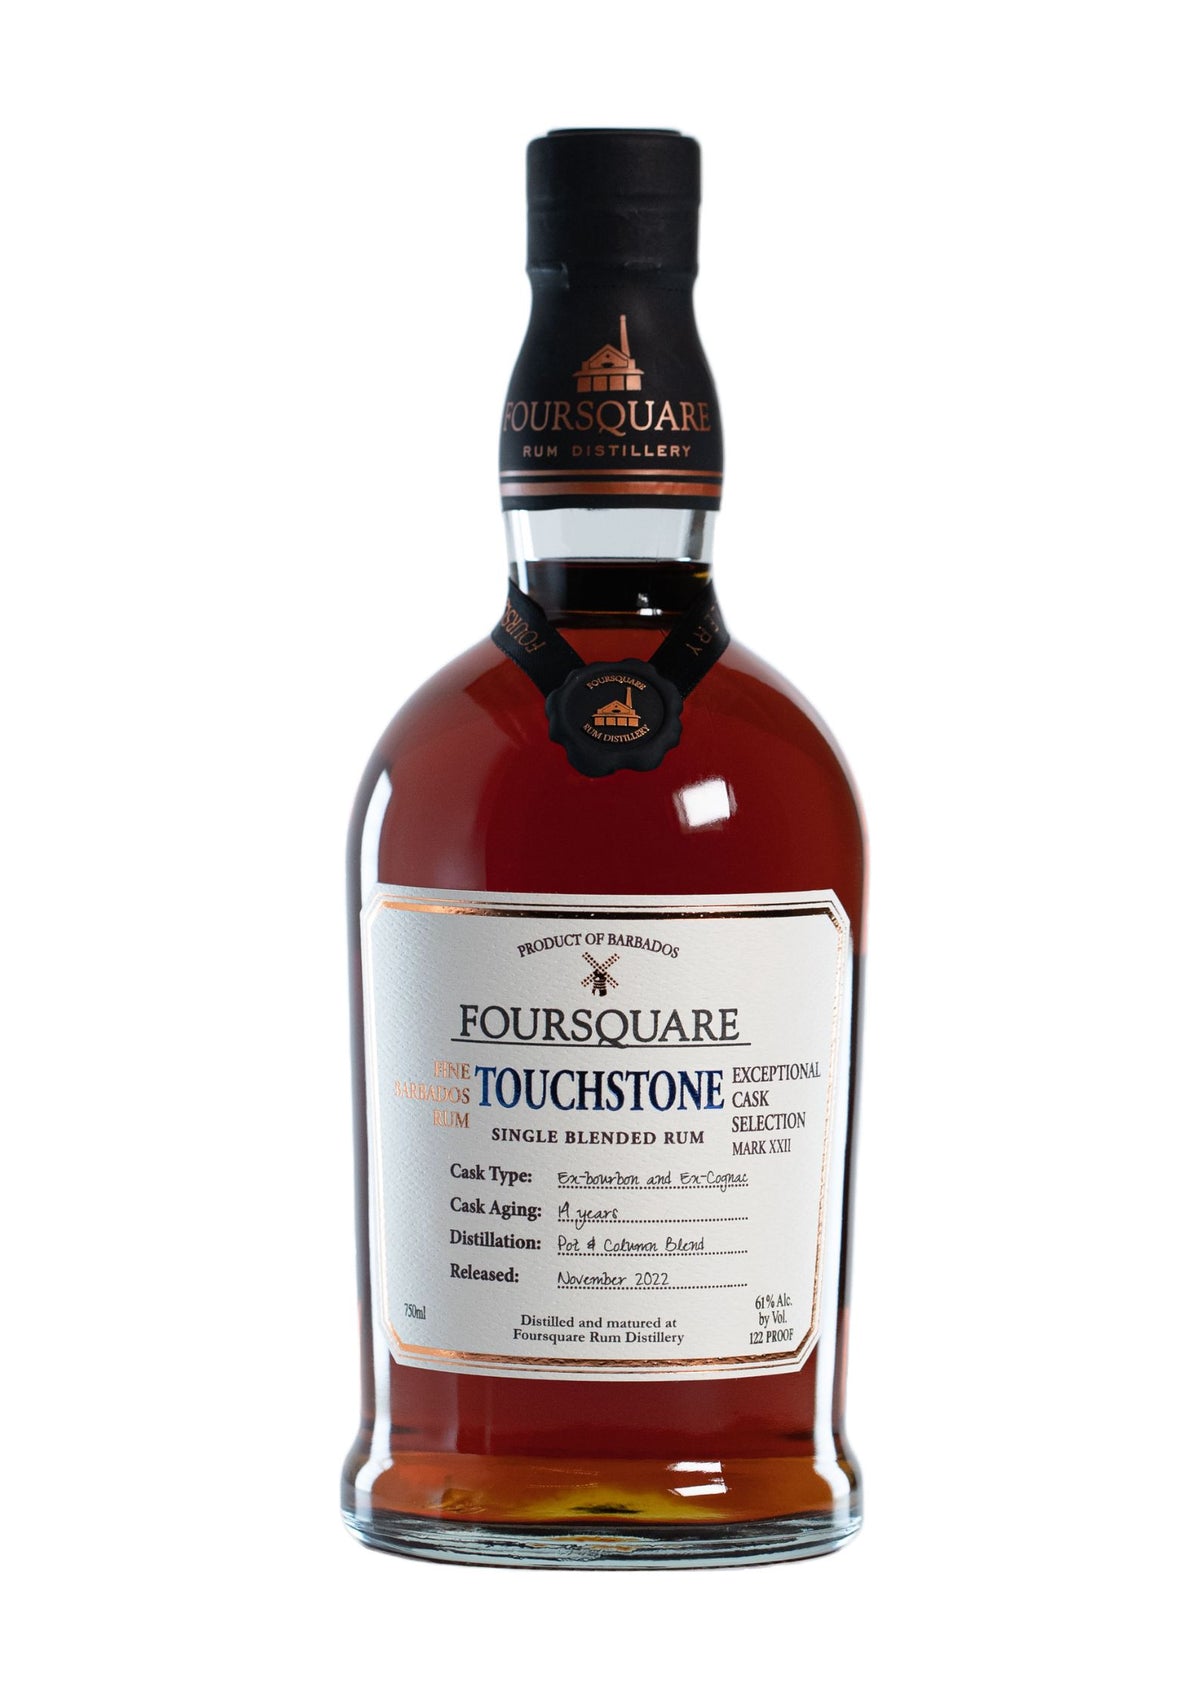 Foursquare Touchstone, 14-Year-Old Single Blended Rum, Barbados, 61%